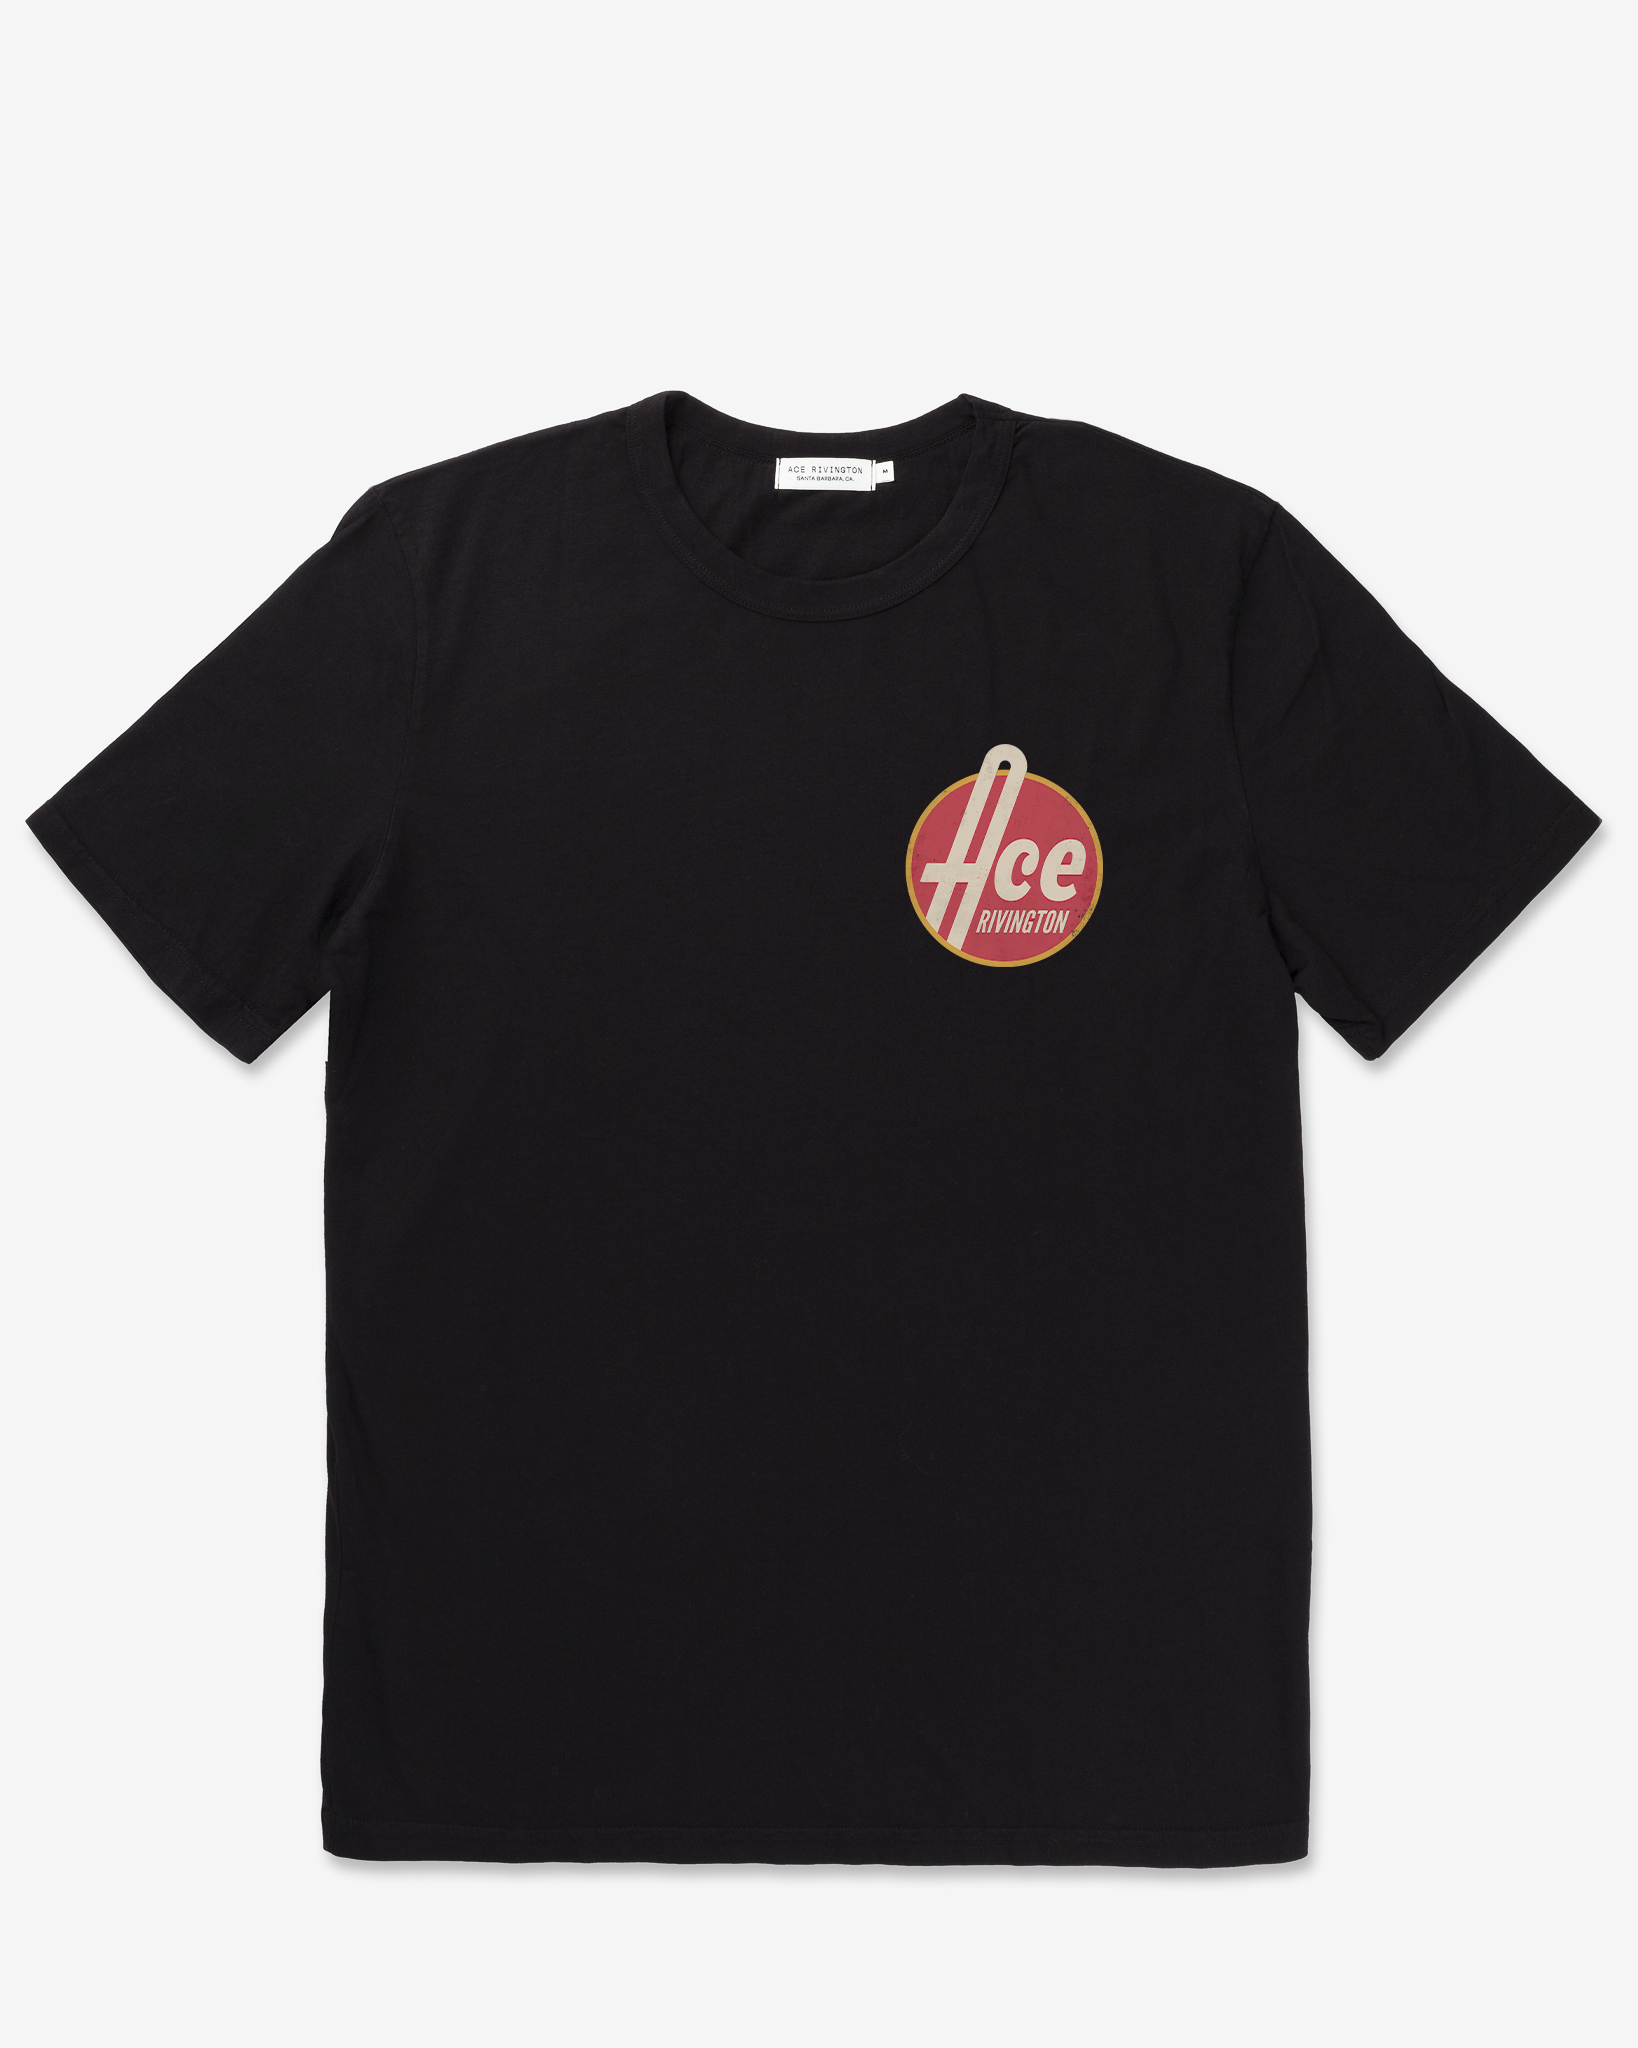 front of men's black graphic tee shirt parodying 1950's style aesthetic reading "Ace Rivington" in bold off-white text encircled by a red fill and gold rim shrunk to palm size on the left breast area